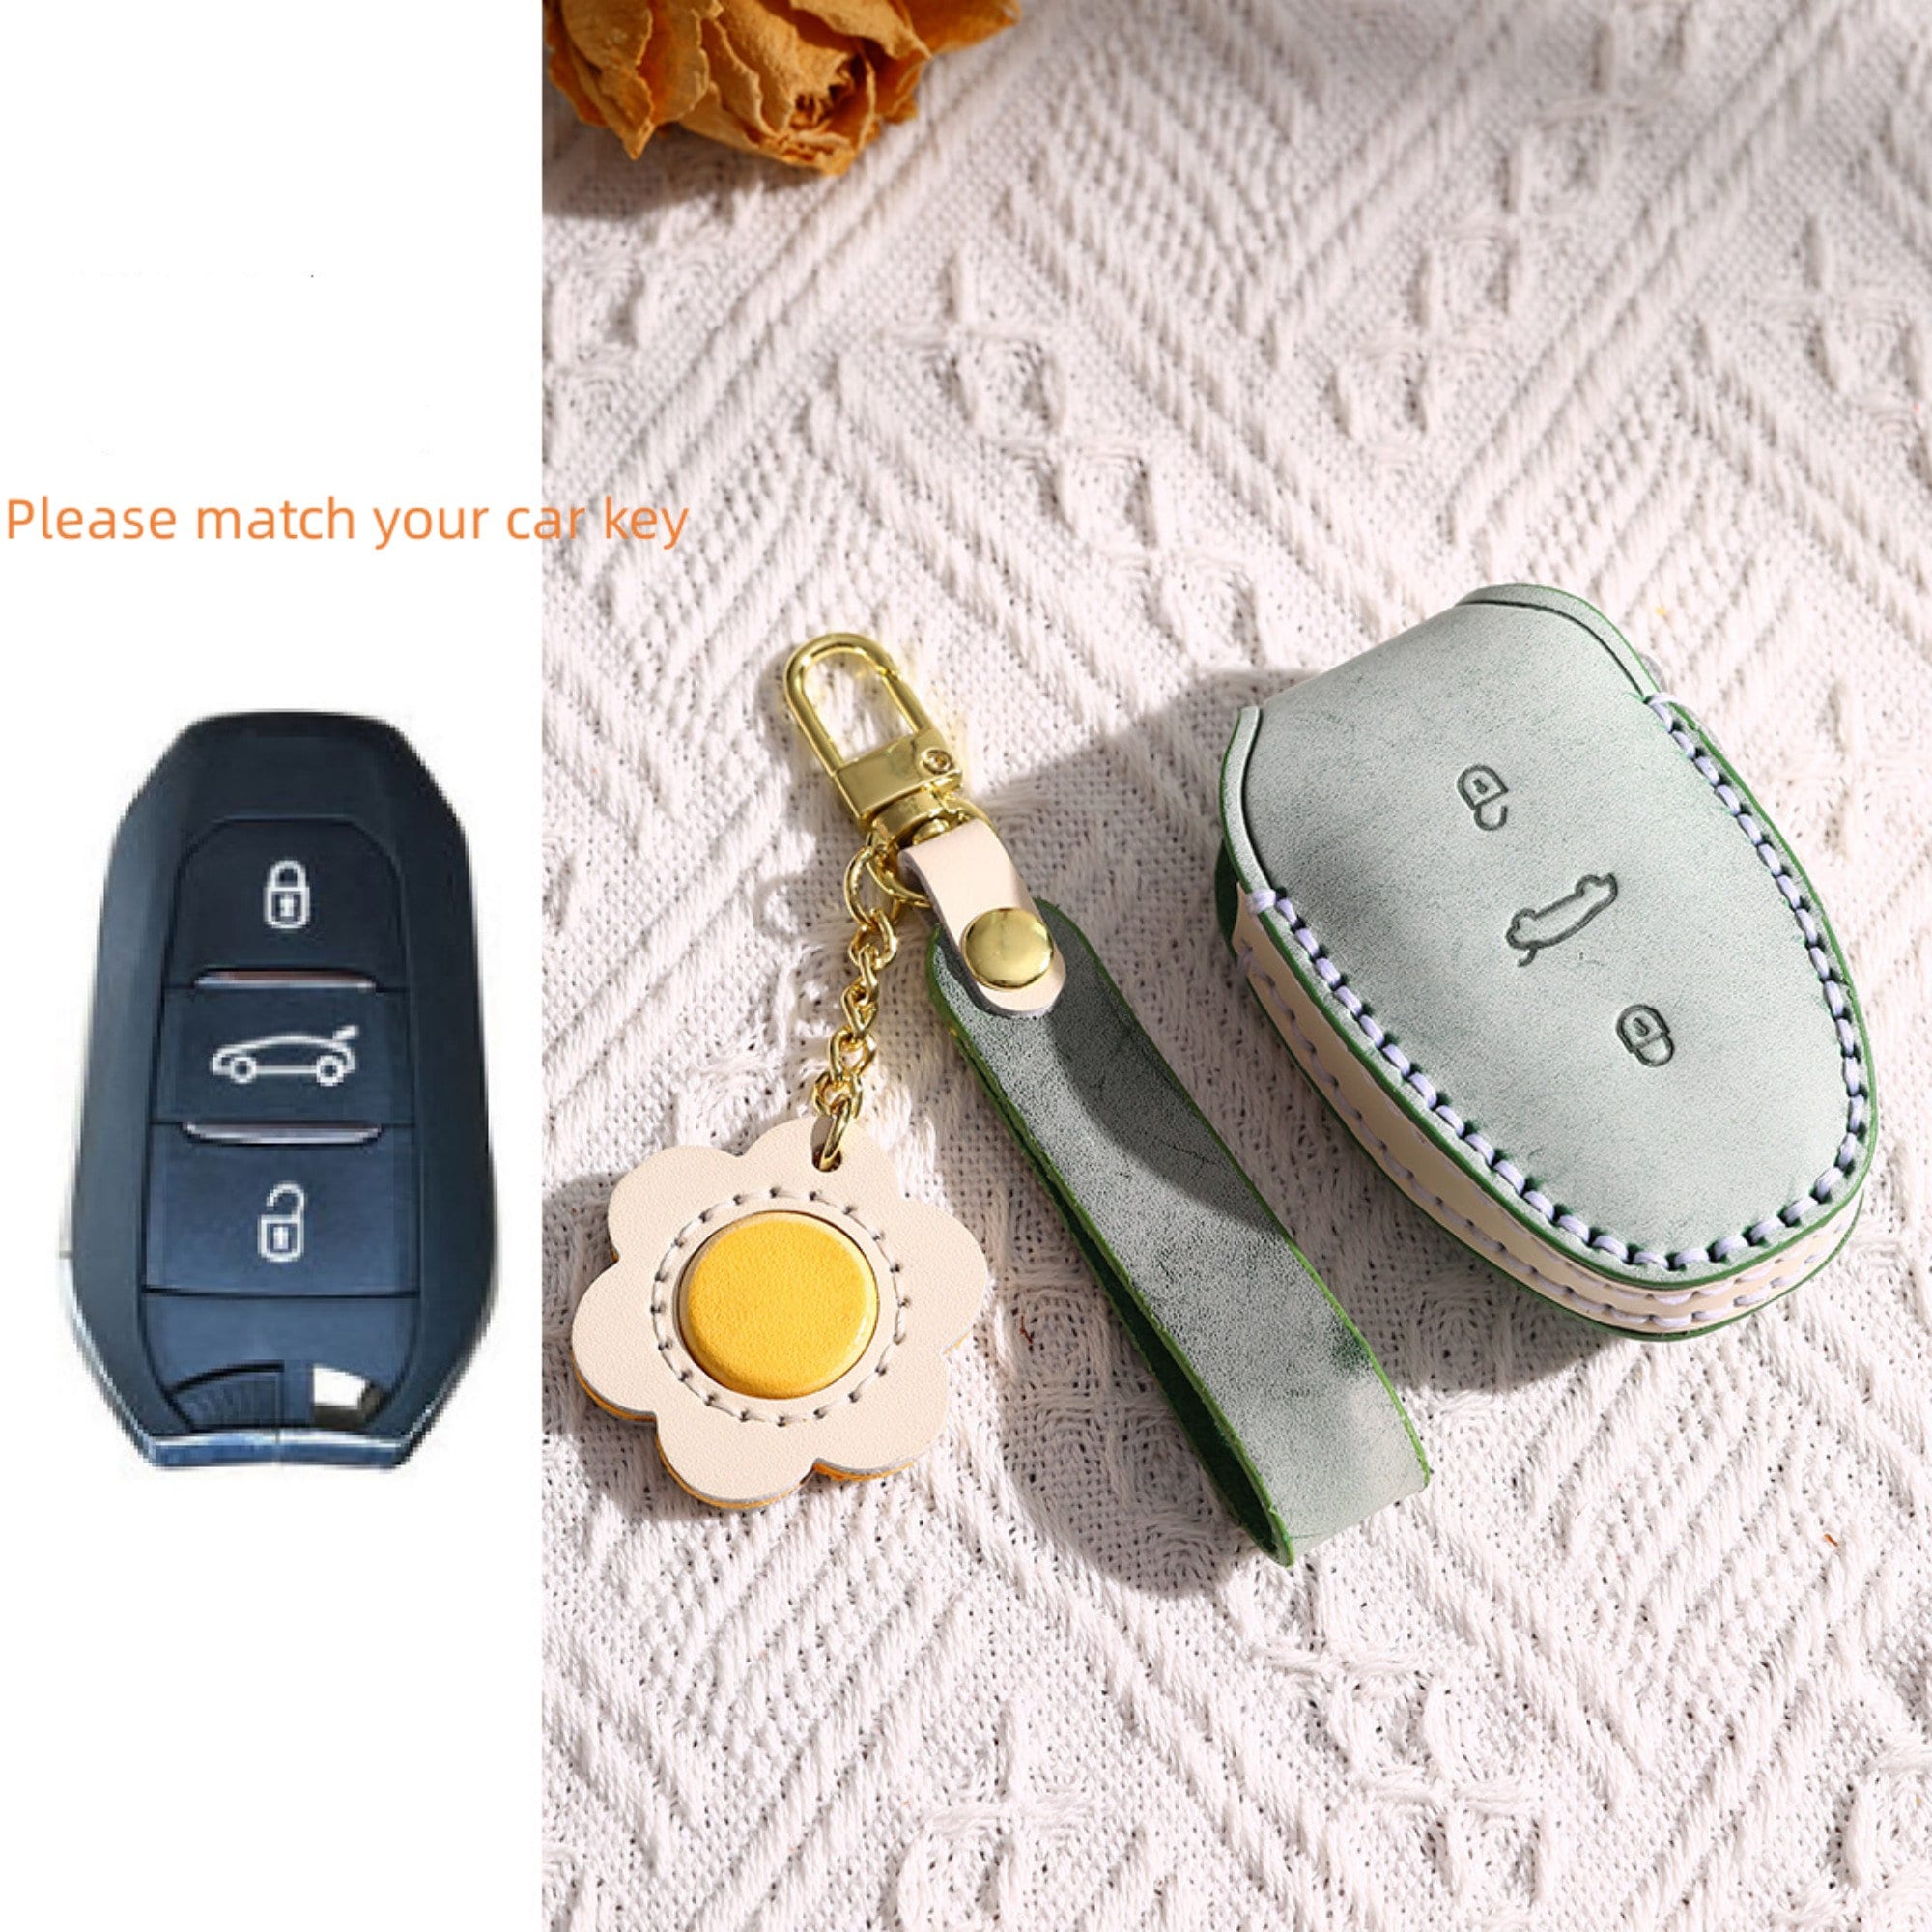 Pure Handmade Leather Lexus Car Key Case for Old Rx270es240 Lexus Lx570, Remote  Key Case, Key Case, Key Fob Cover, Car Key Cover 